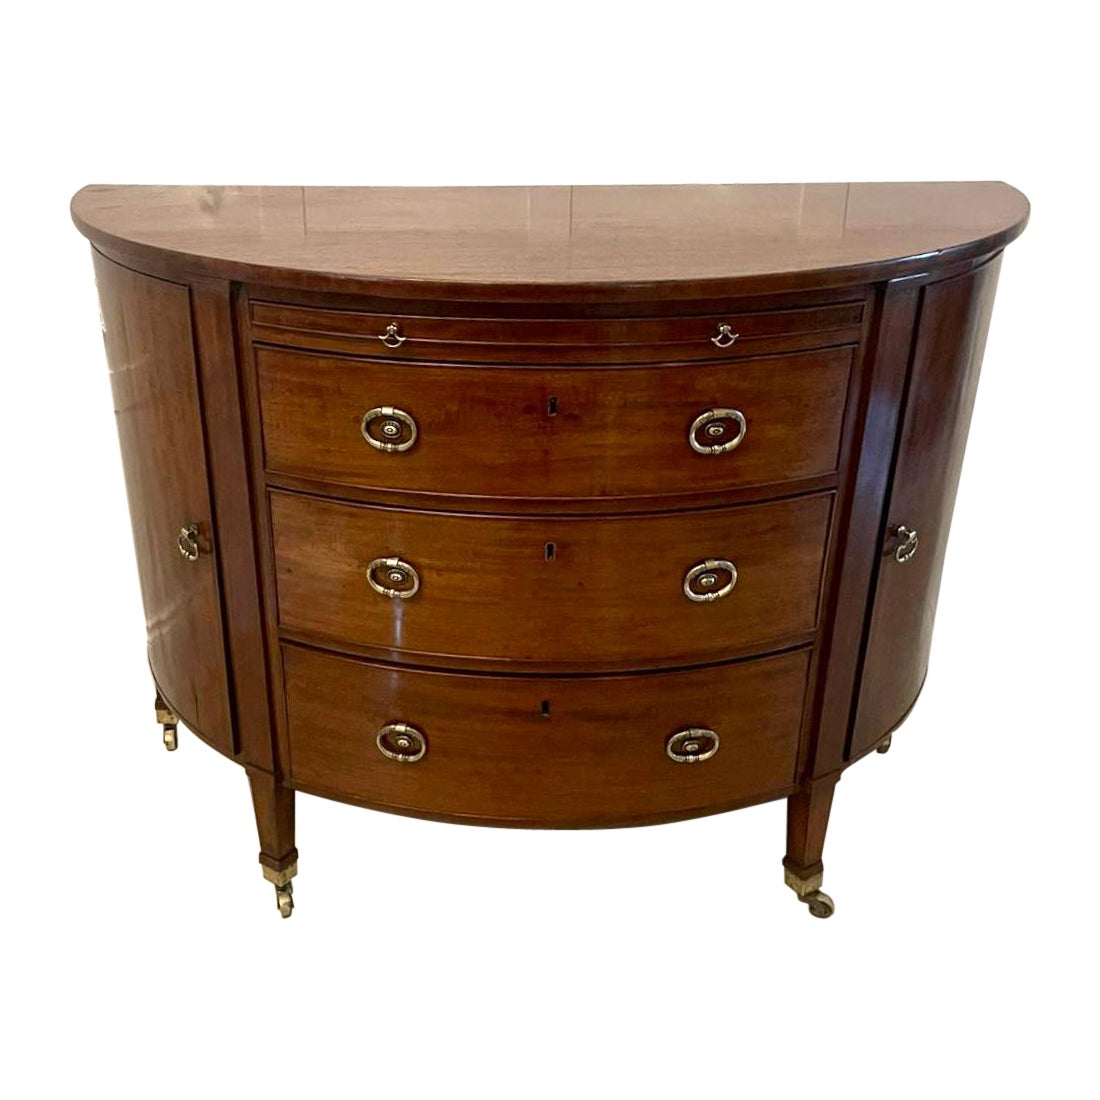 Antique George III Quality Mahogany Demi Lune Shaped Commode/Chest of Drawers